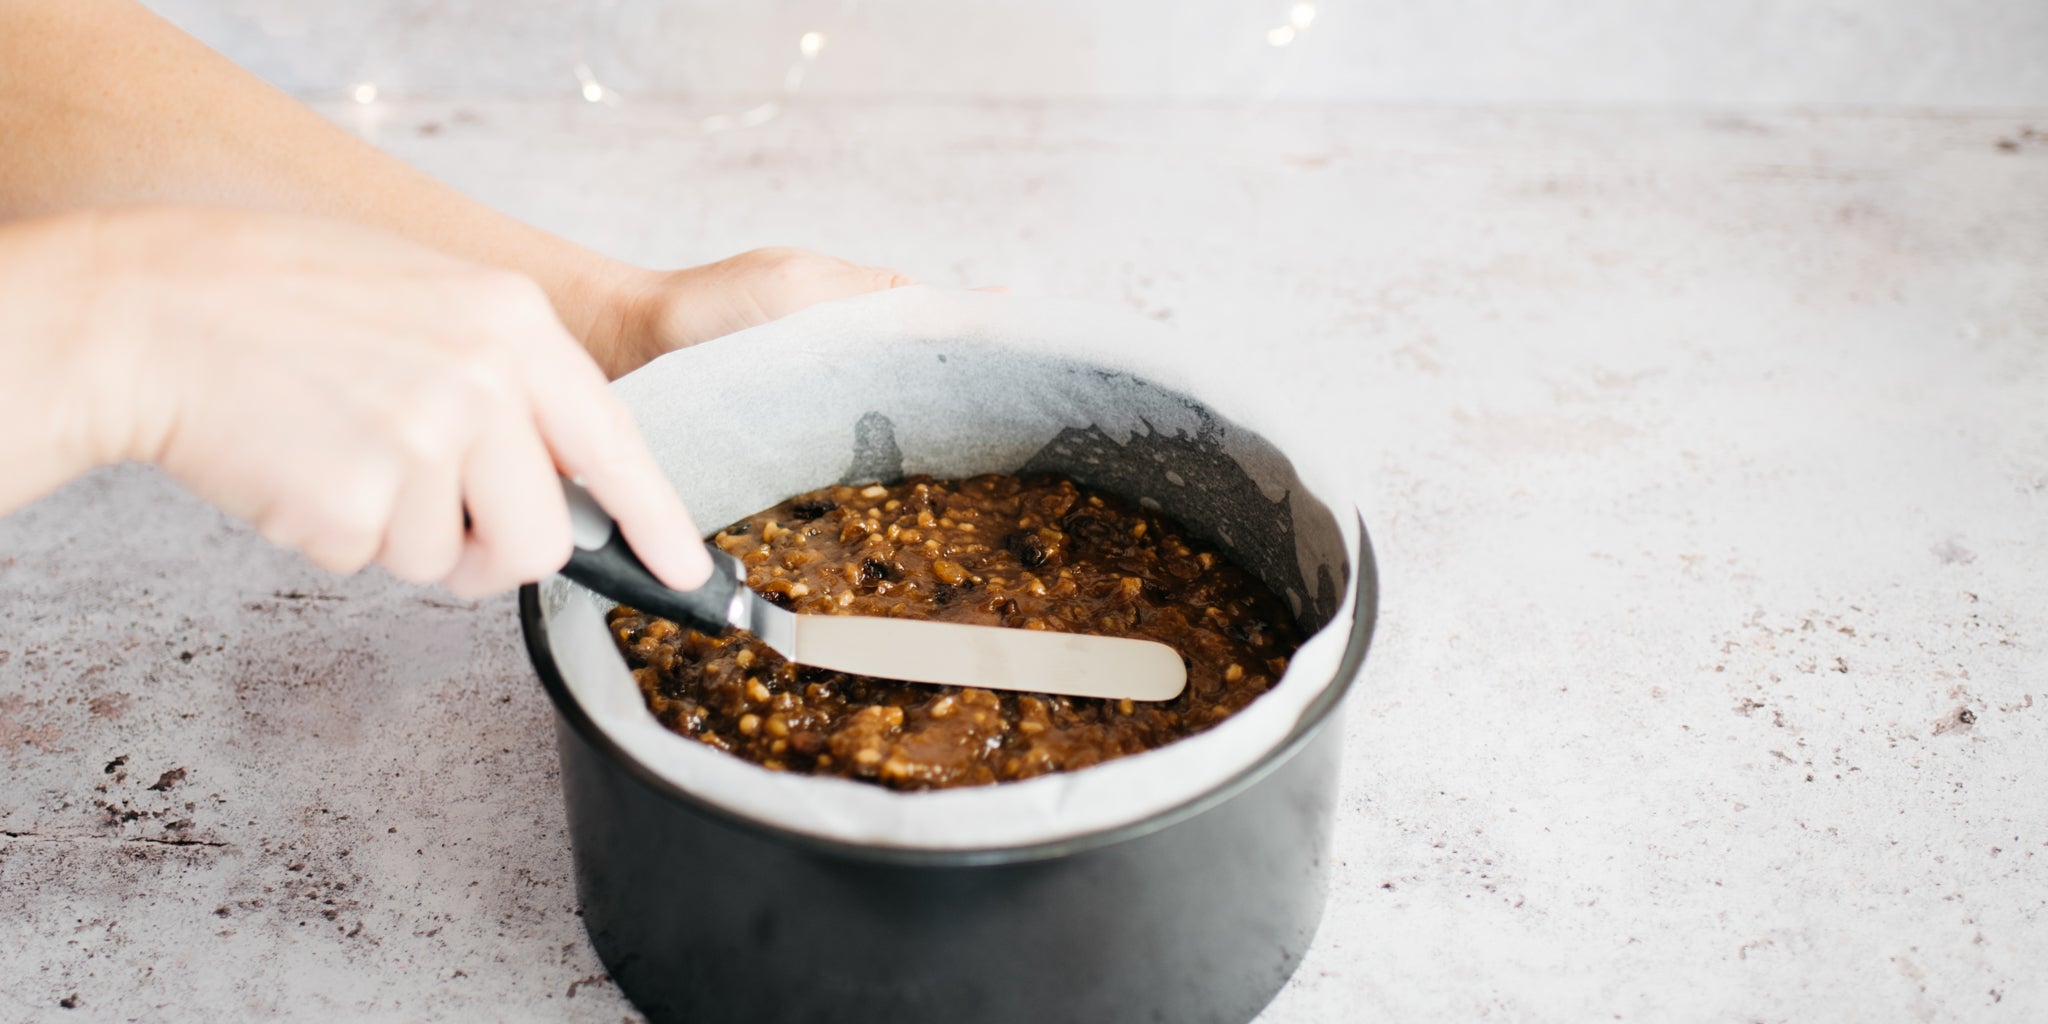 Smoothing down a Christmas cake mixture inside a metal cake tin